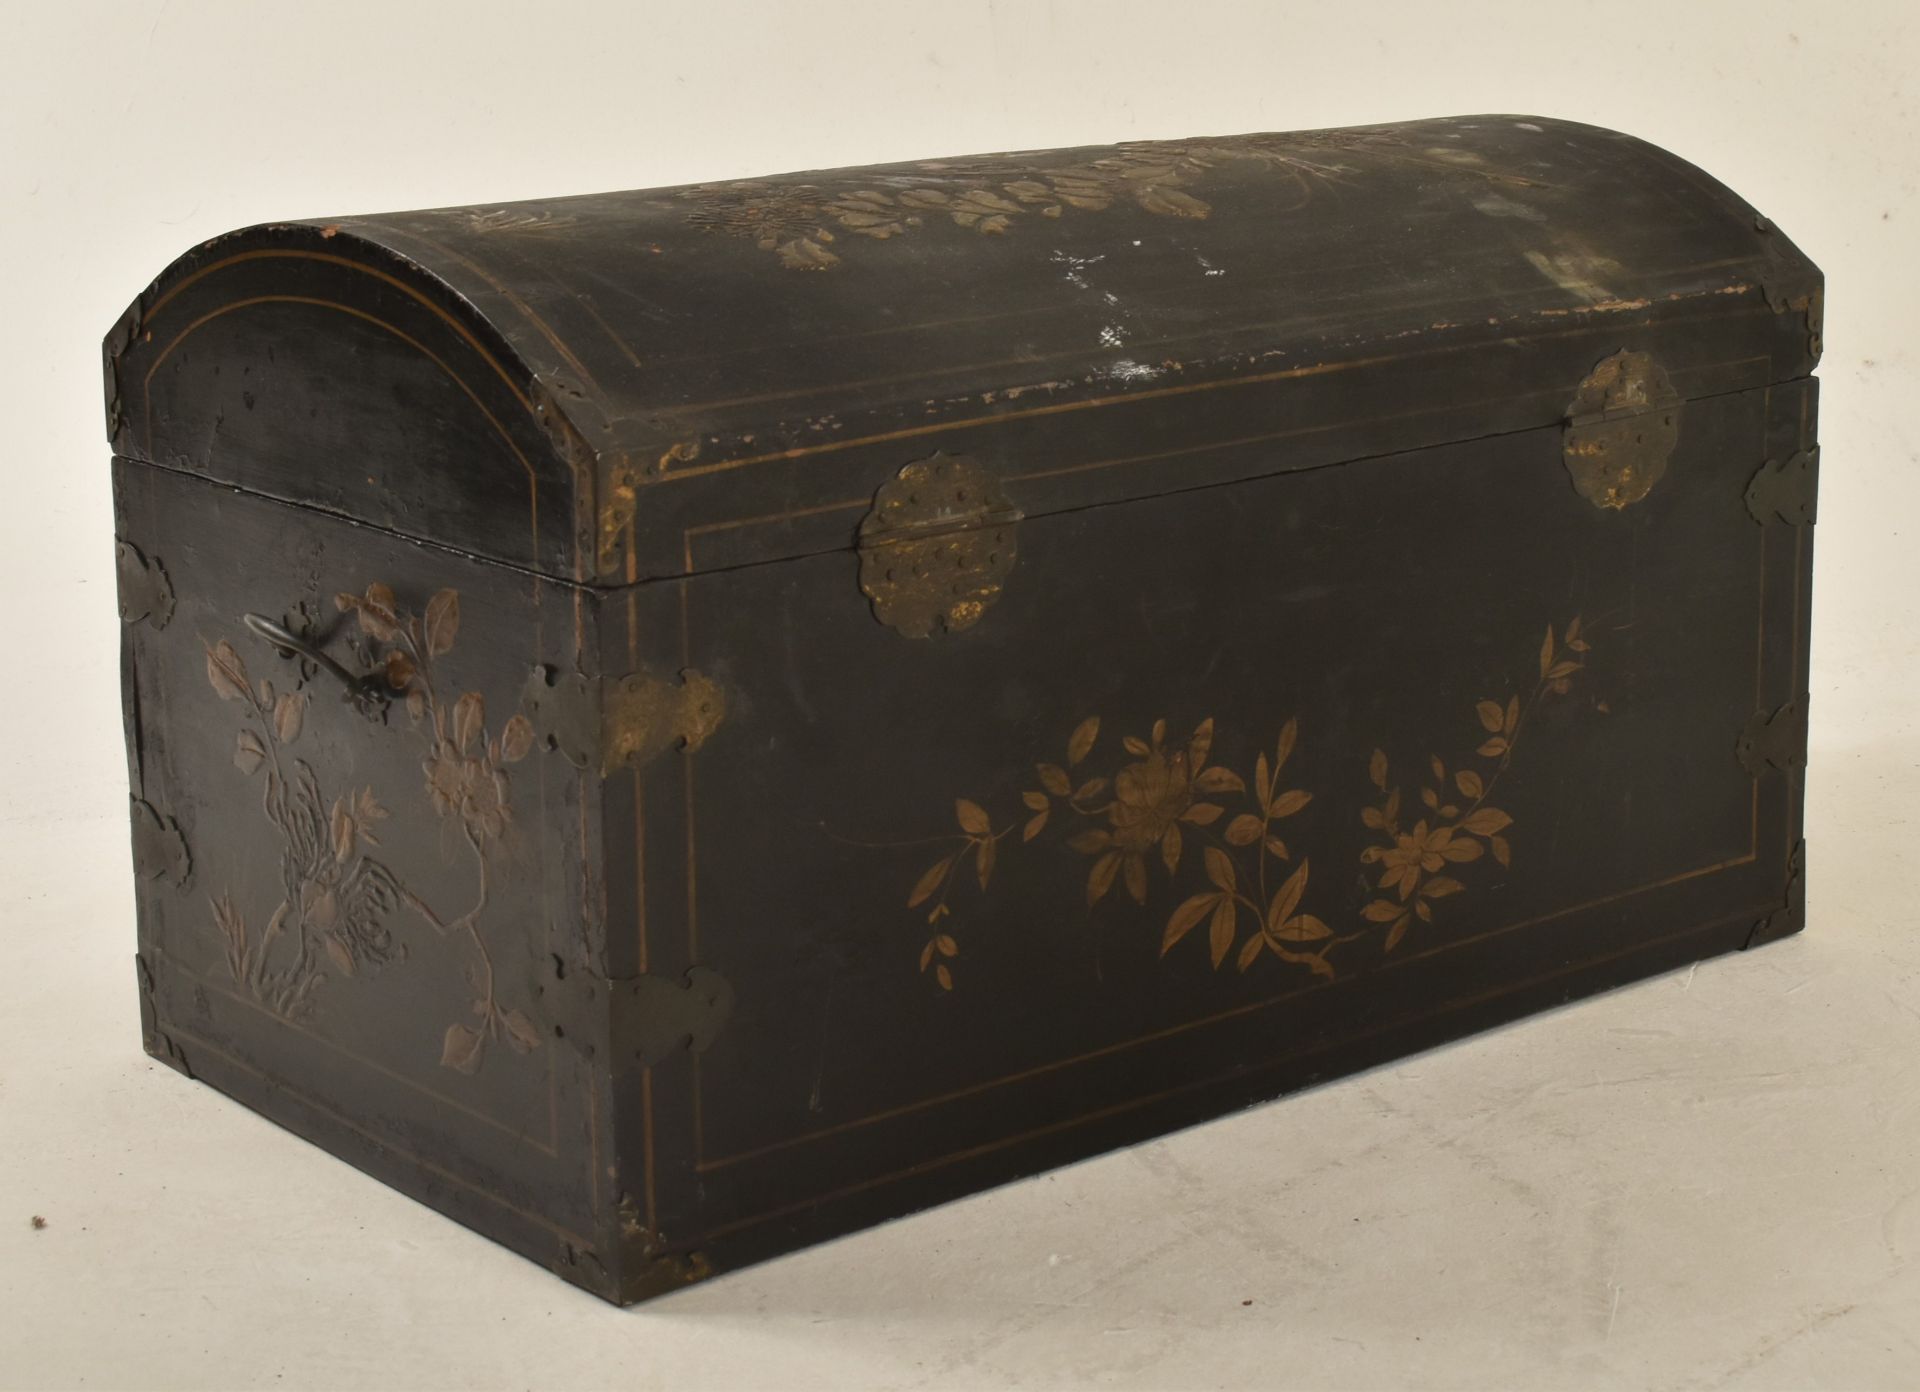 QING DYNASTY WOODEN LACQUERED STORAGE CHEST 清 富贵木宝箱 - Image 10 of 10